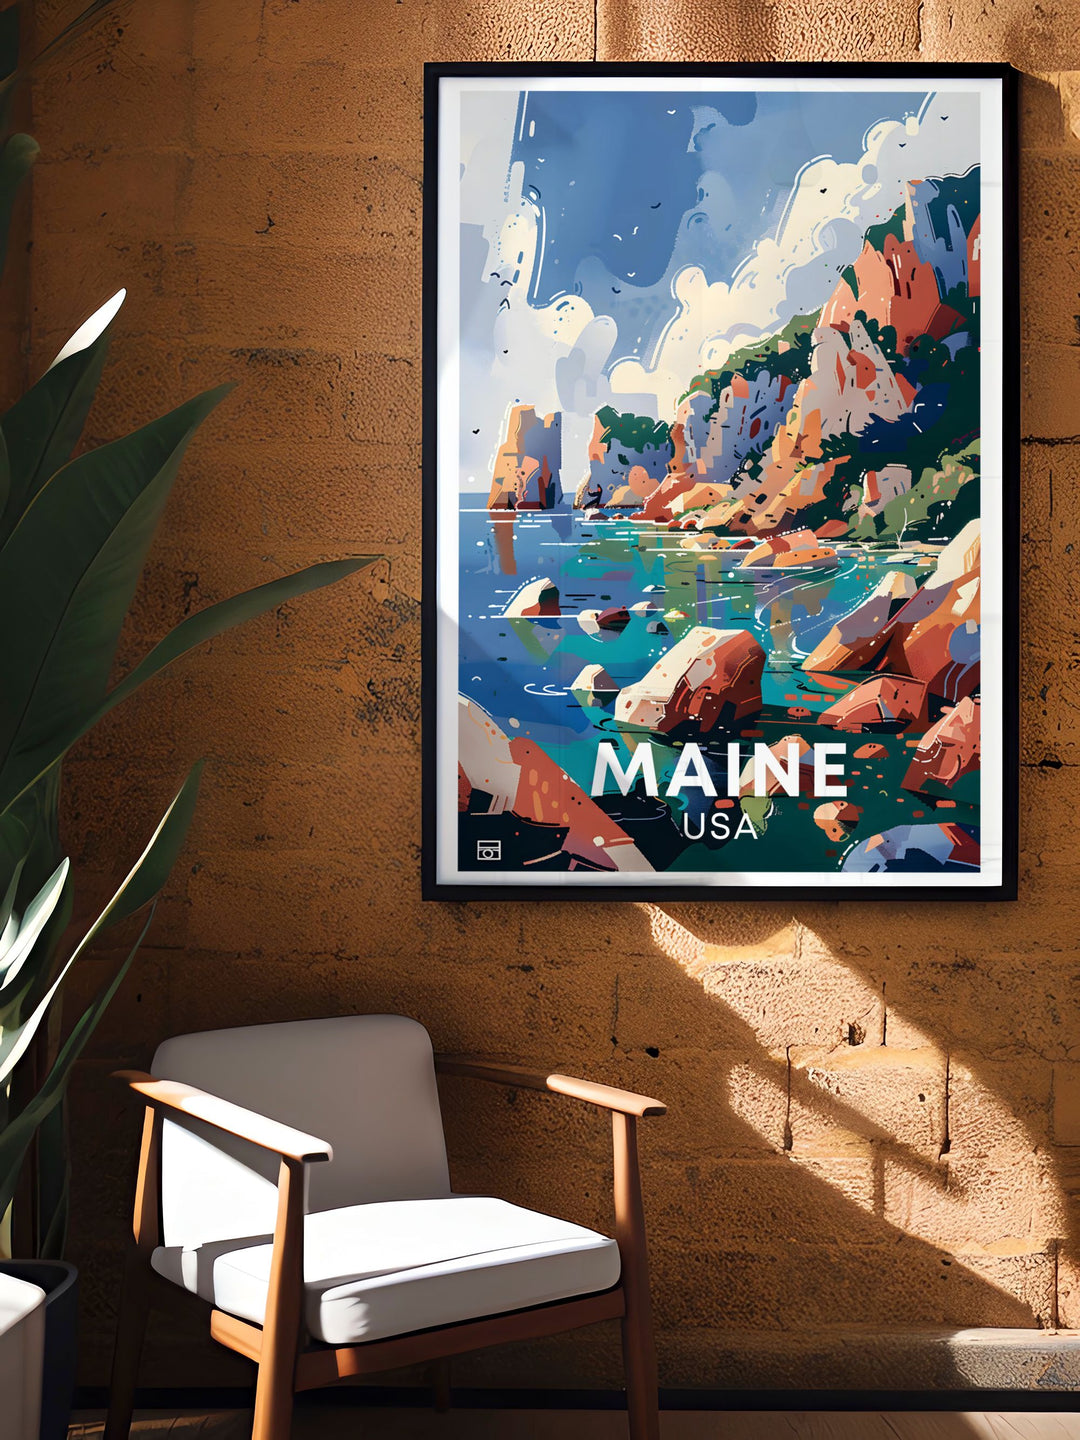 Highlighting the natural beauty and rich history of Acadia National Park, this poster captures the essence of Maines most iconic national park. Perfect for those who appreciate preserved landscapes and historical significance, this artwork brings the charm of Acadia into your home decor.